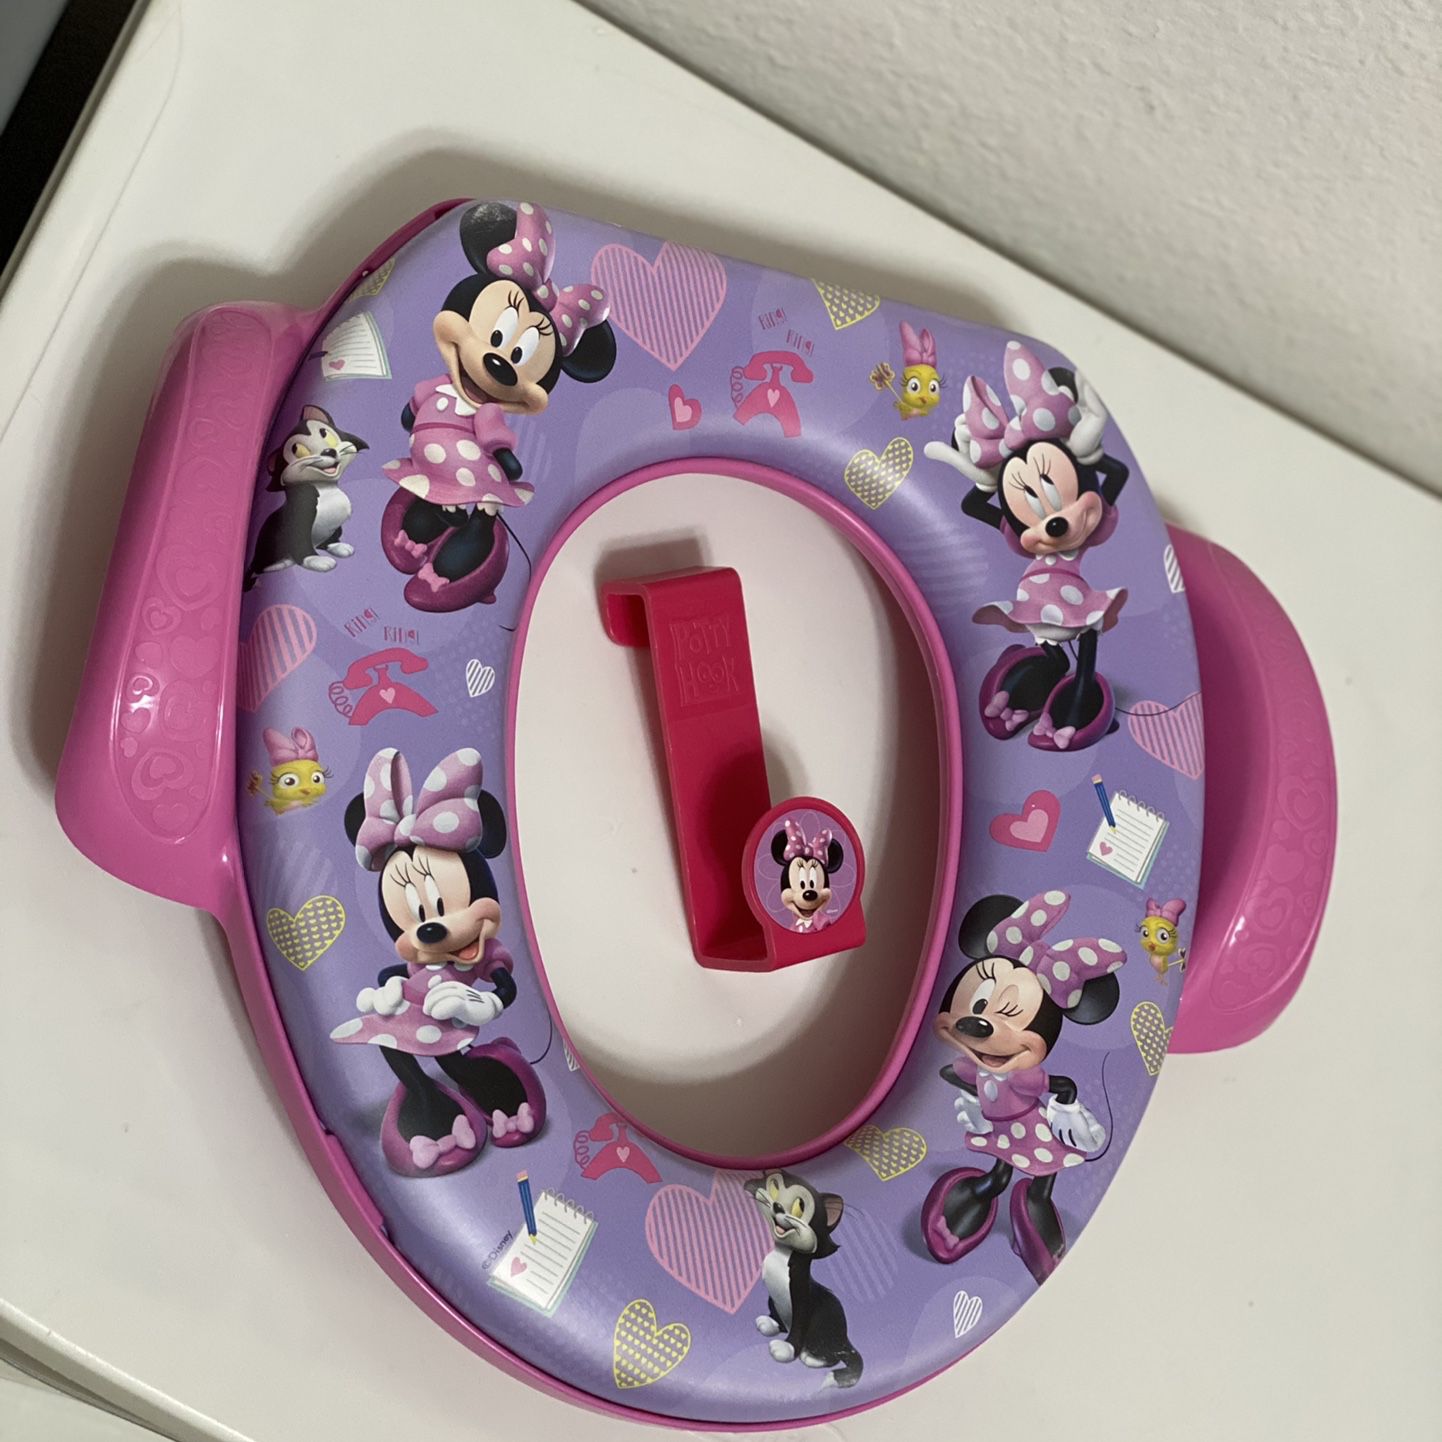 ***FREE*** Minnie Mouse Potty Training Seat With The Hook